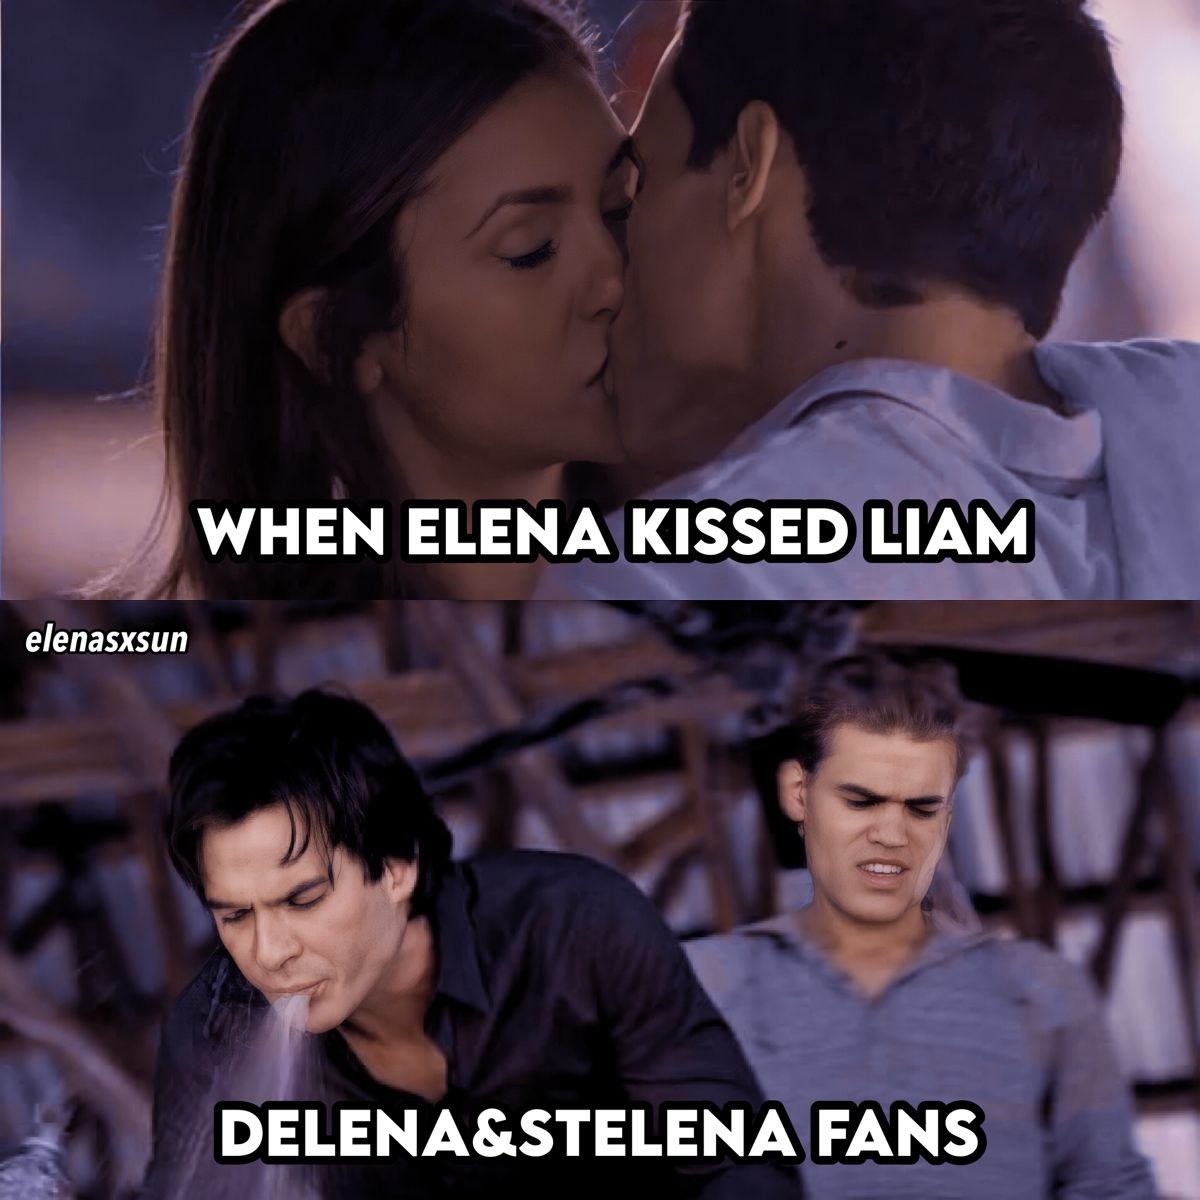 Elena and Liam kissing on top and Stefan and Damon in bottom photo looking nauseated and vomiting as &quot;Delena &amp; Stelena fans&quot;